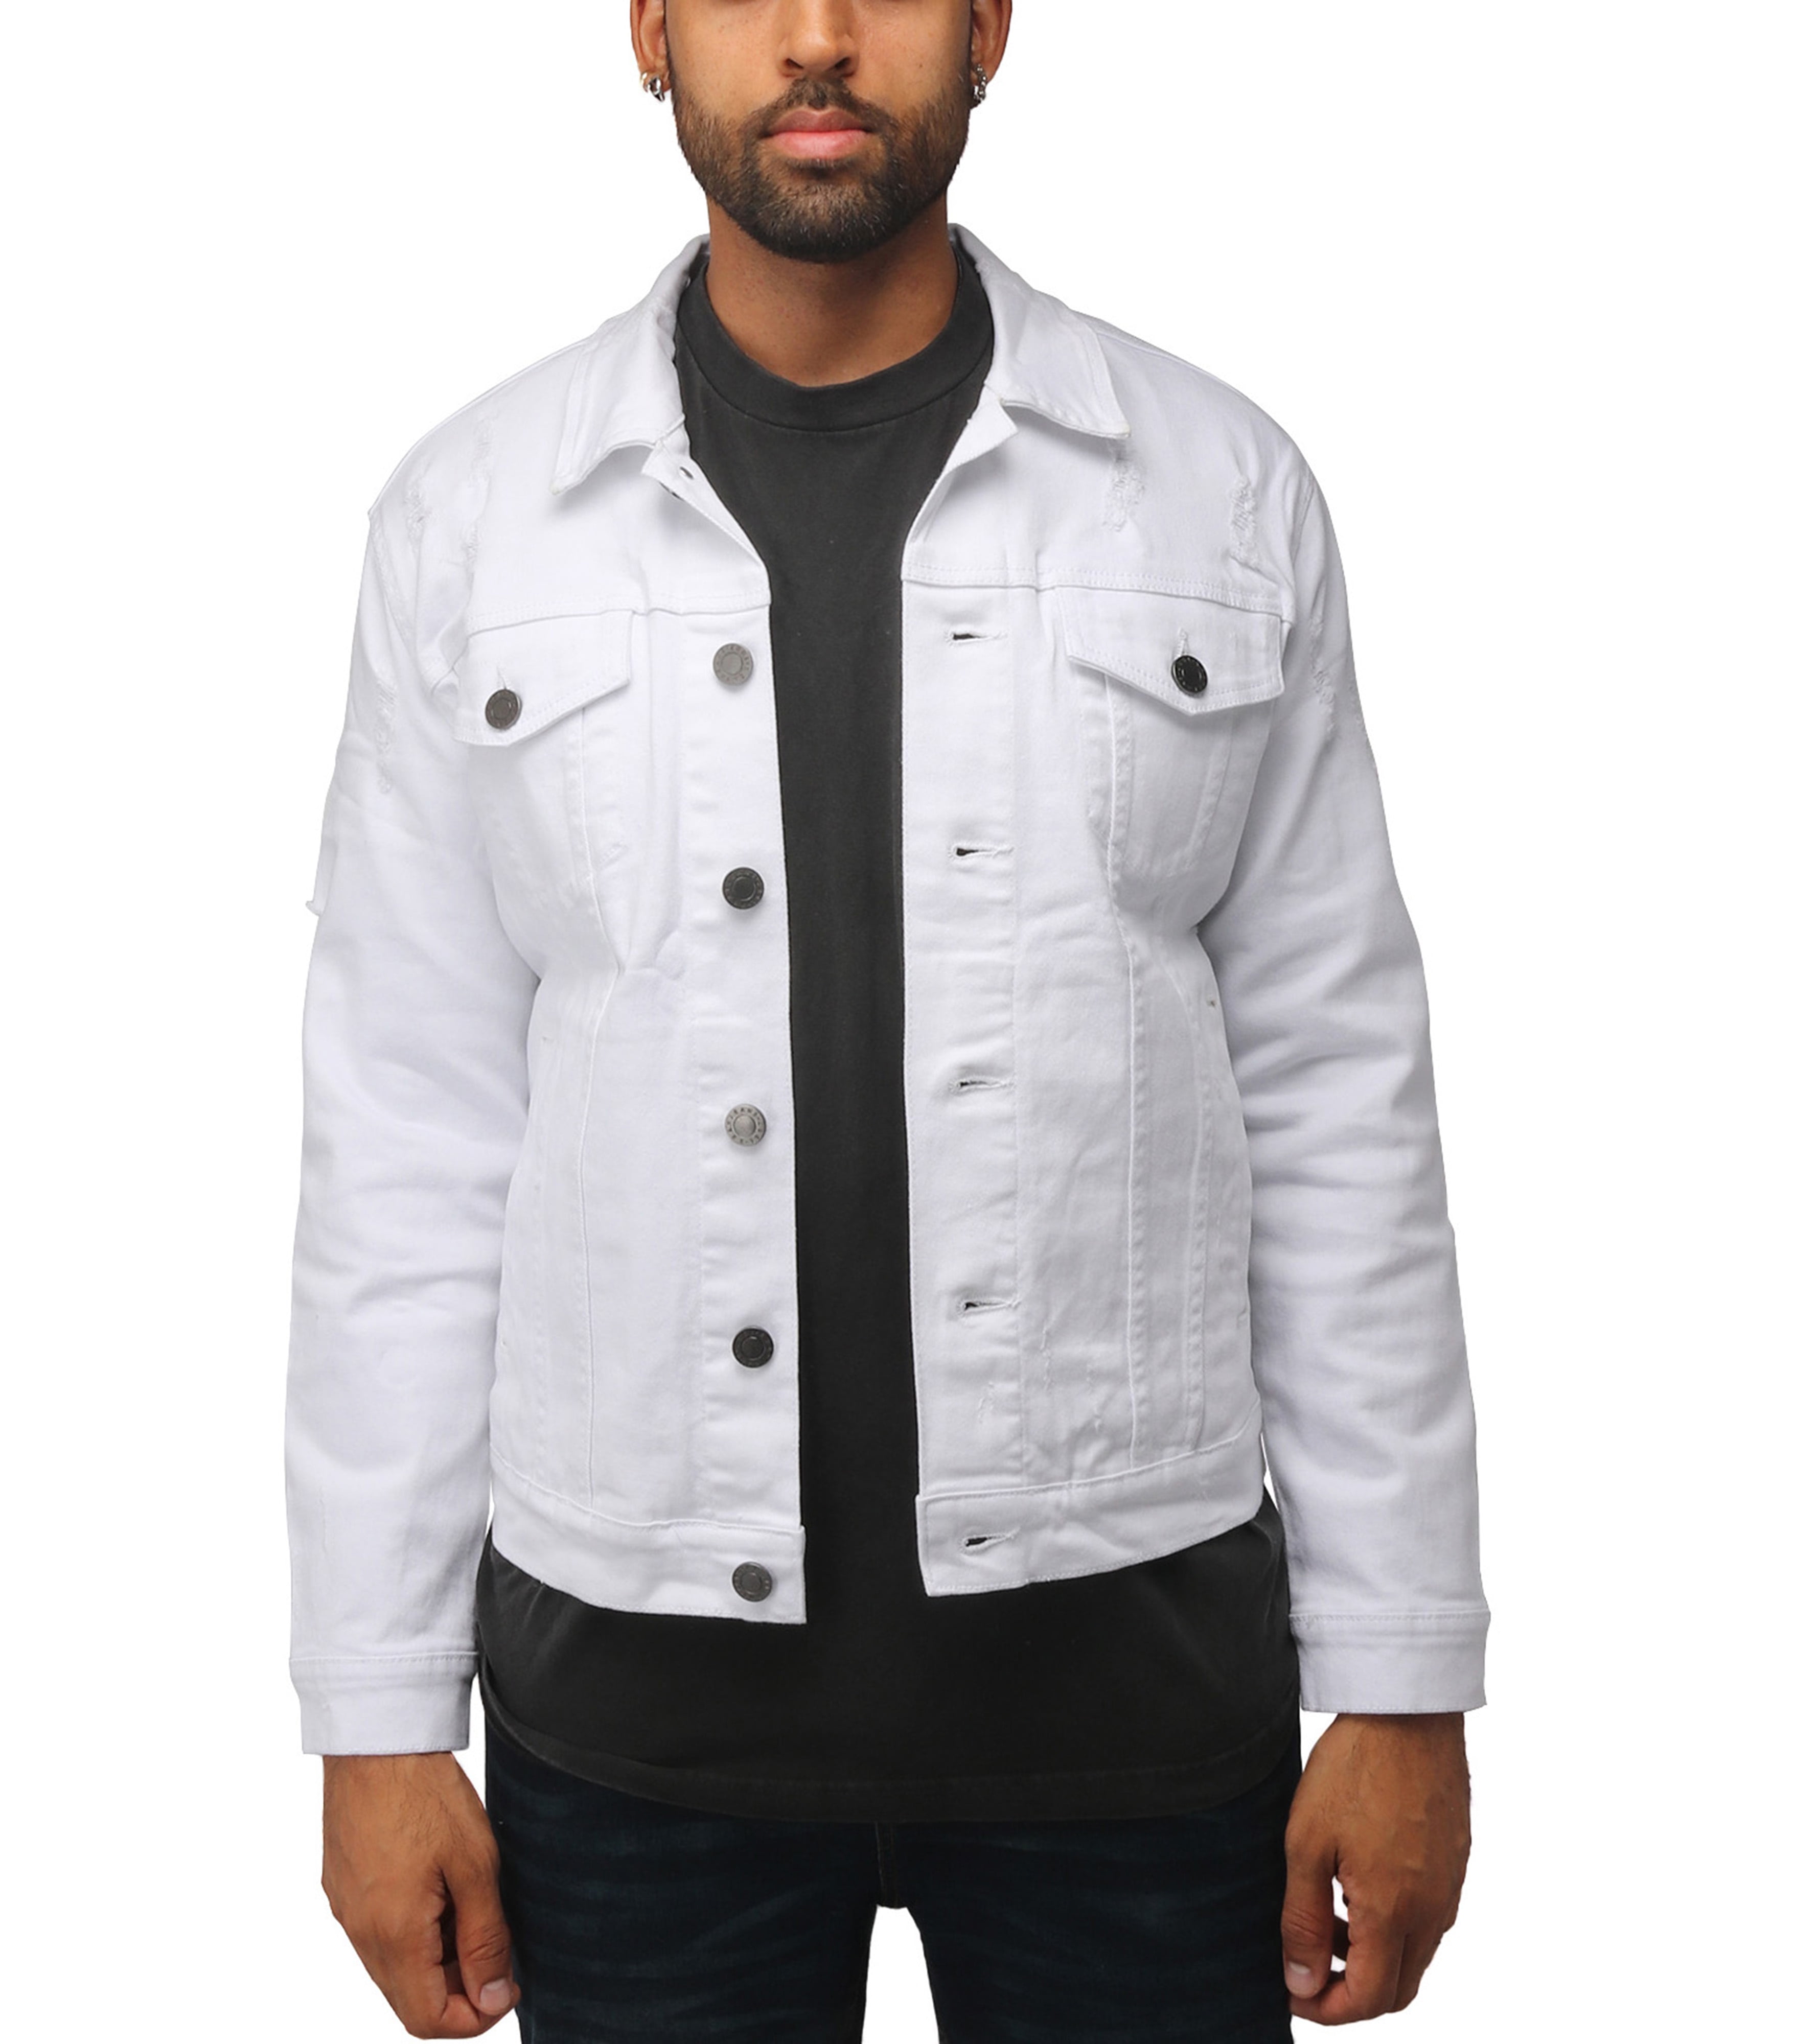 X RAY Mens Denim Jacket Washed Casual Trucker Jacket for Men, White - Ripped, Large - Walmart.com